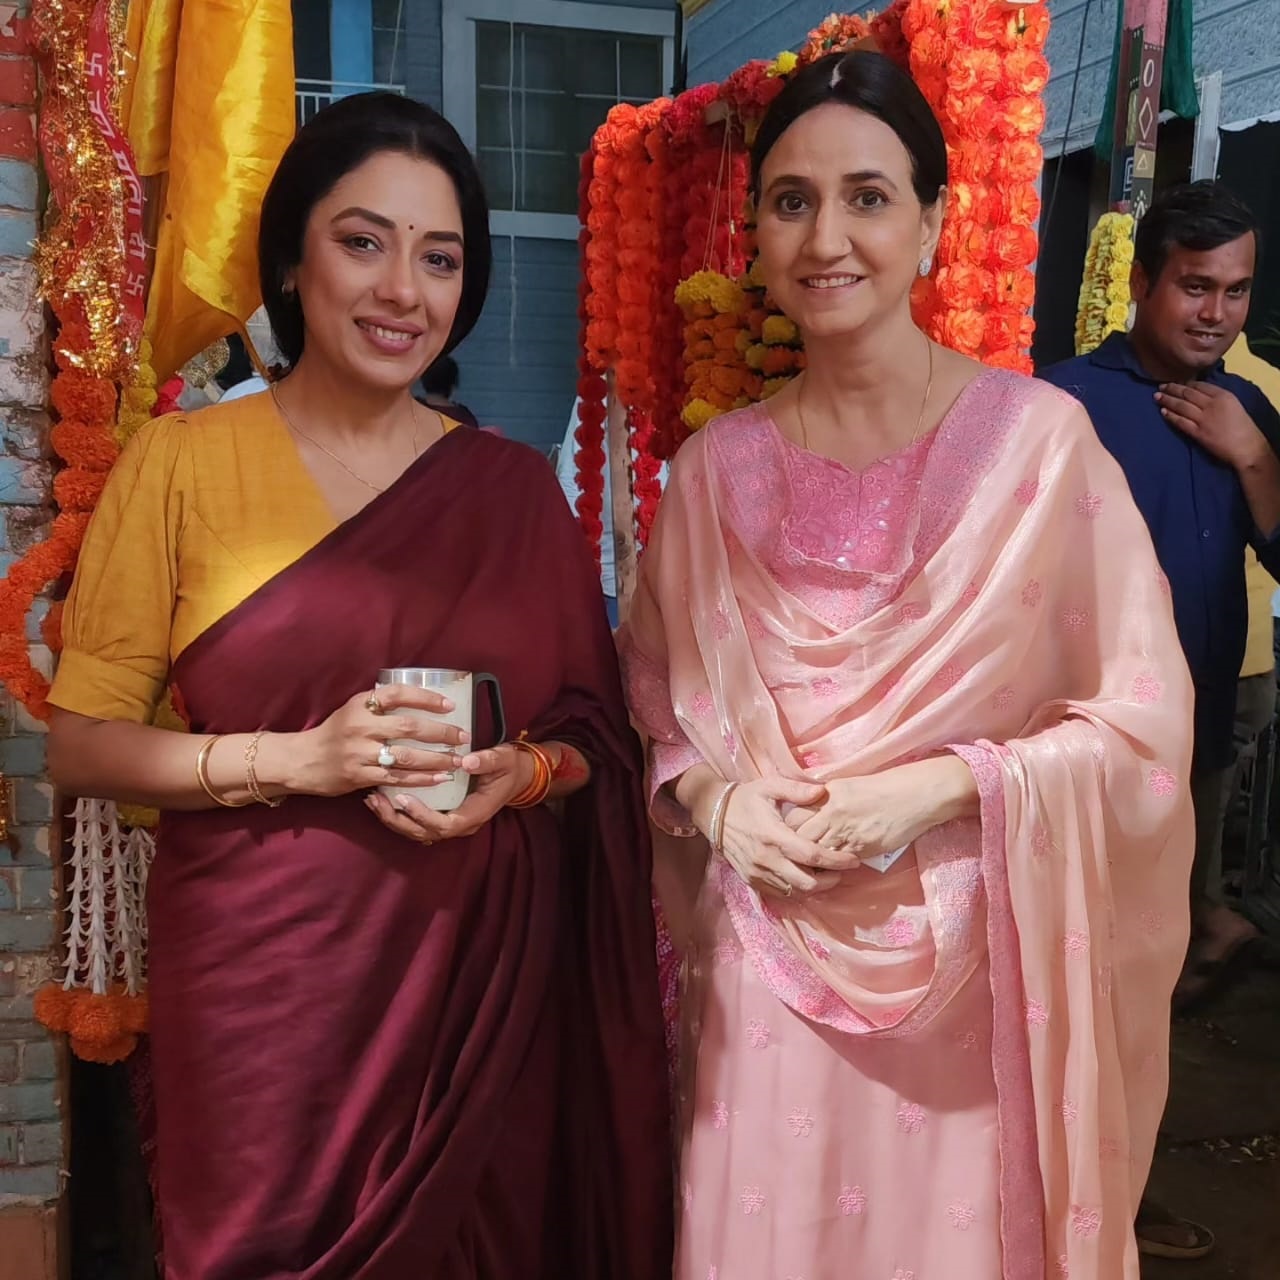 Ladies Special Fame Actress Parveen Kaaur Is Now Joining The Most Popular Serial Anupamaa. Her Presence Made Sure An Extra-Visual Treat For The Audience!